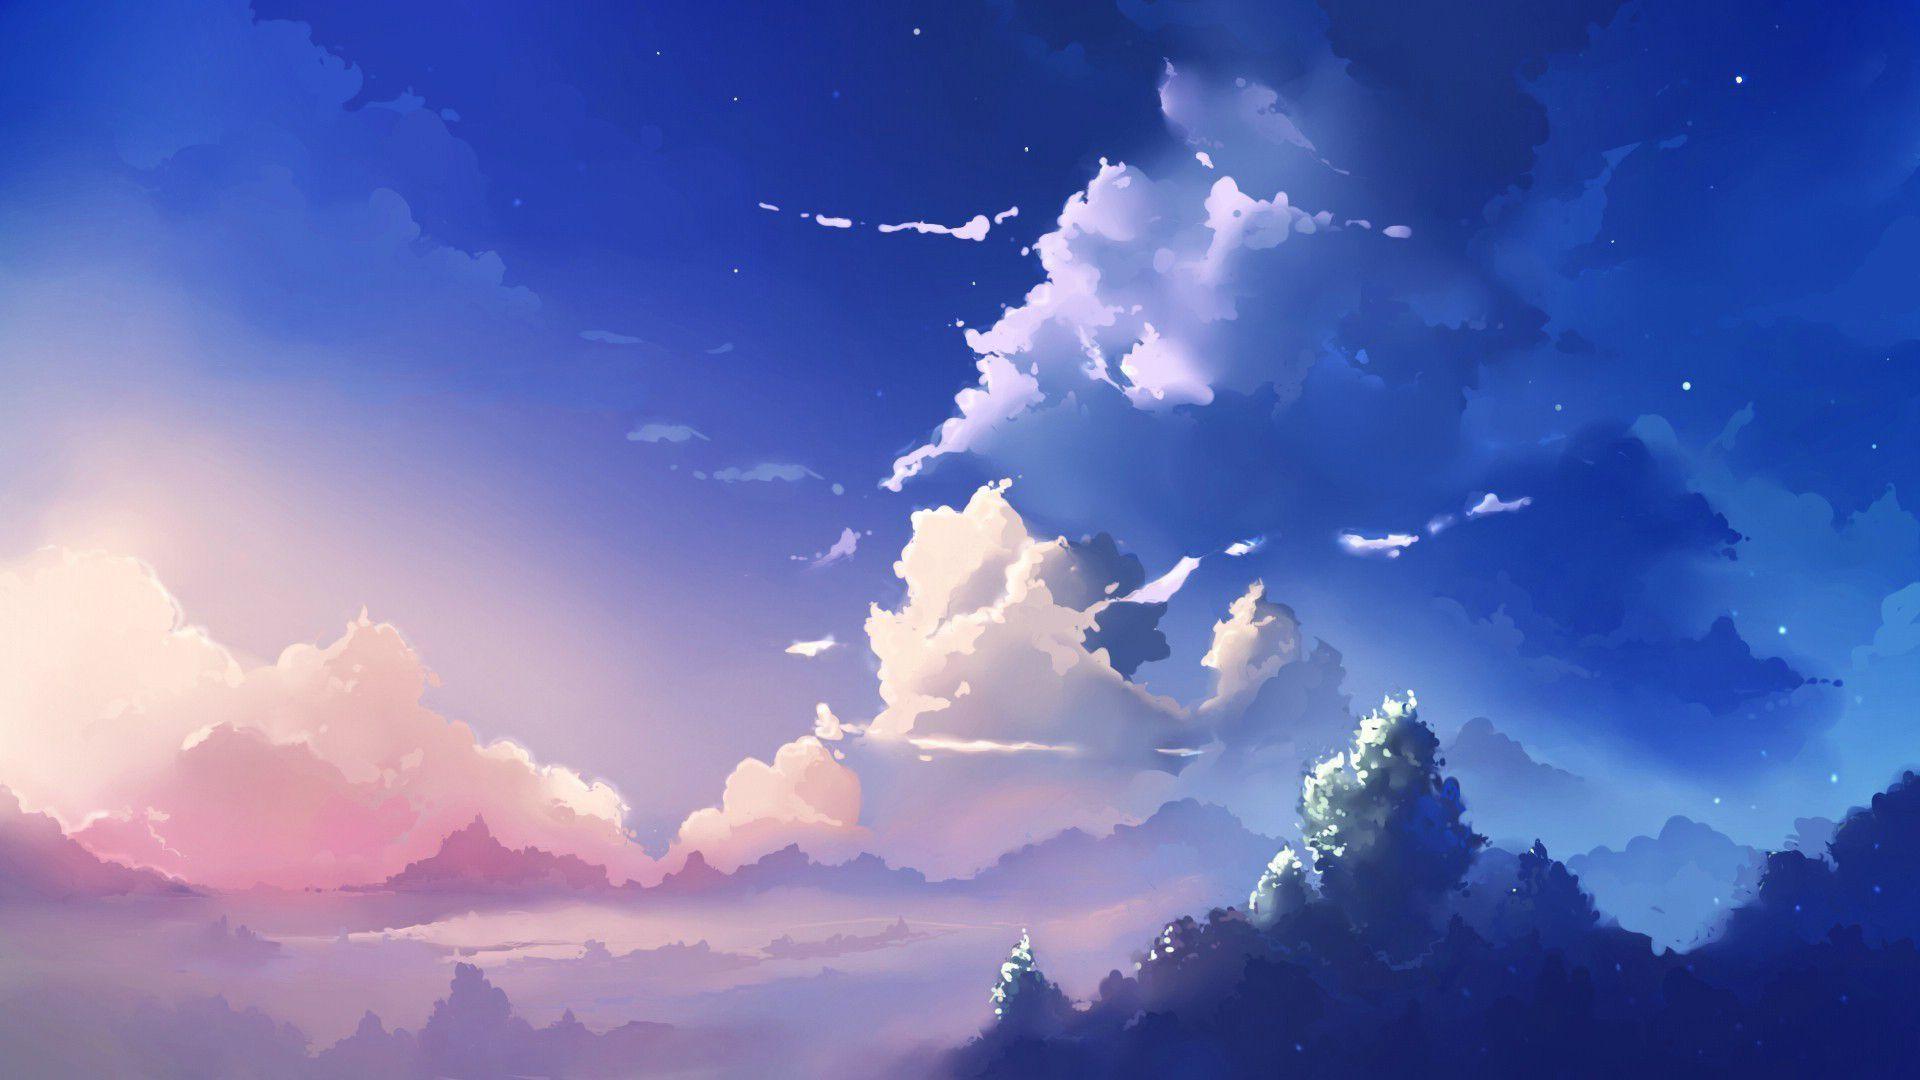 Beautiful Sky Anime Wallpapers - Wallpaper Cave